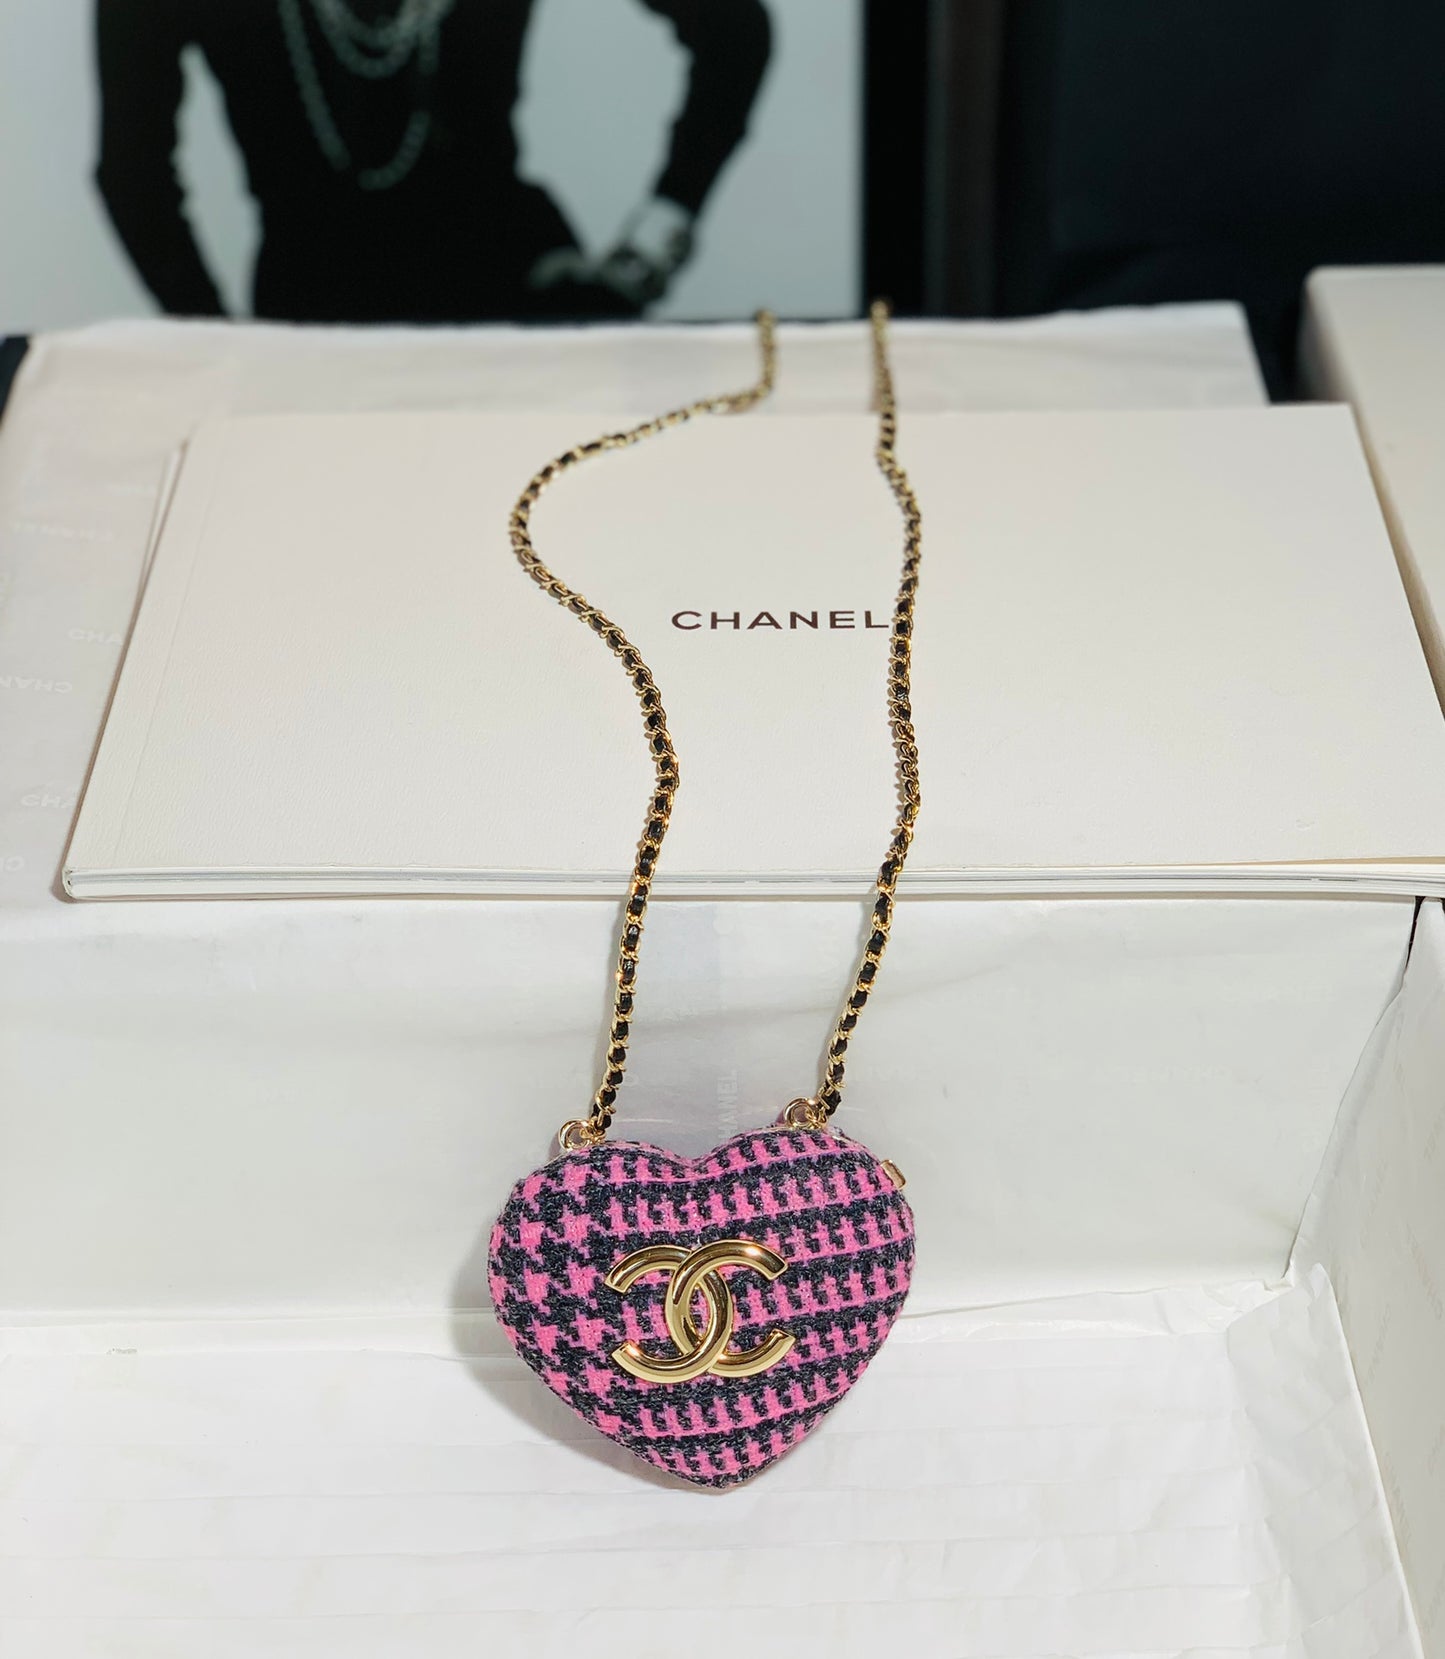 ChanelLong Necklace Bag Black And PiNike For Women, Women&#8217;s Bags 3in/7.6cm AB9485 B09330 NK598